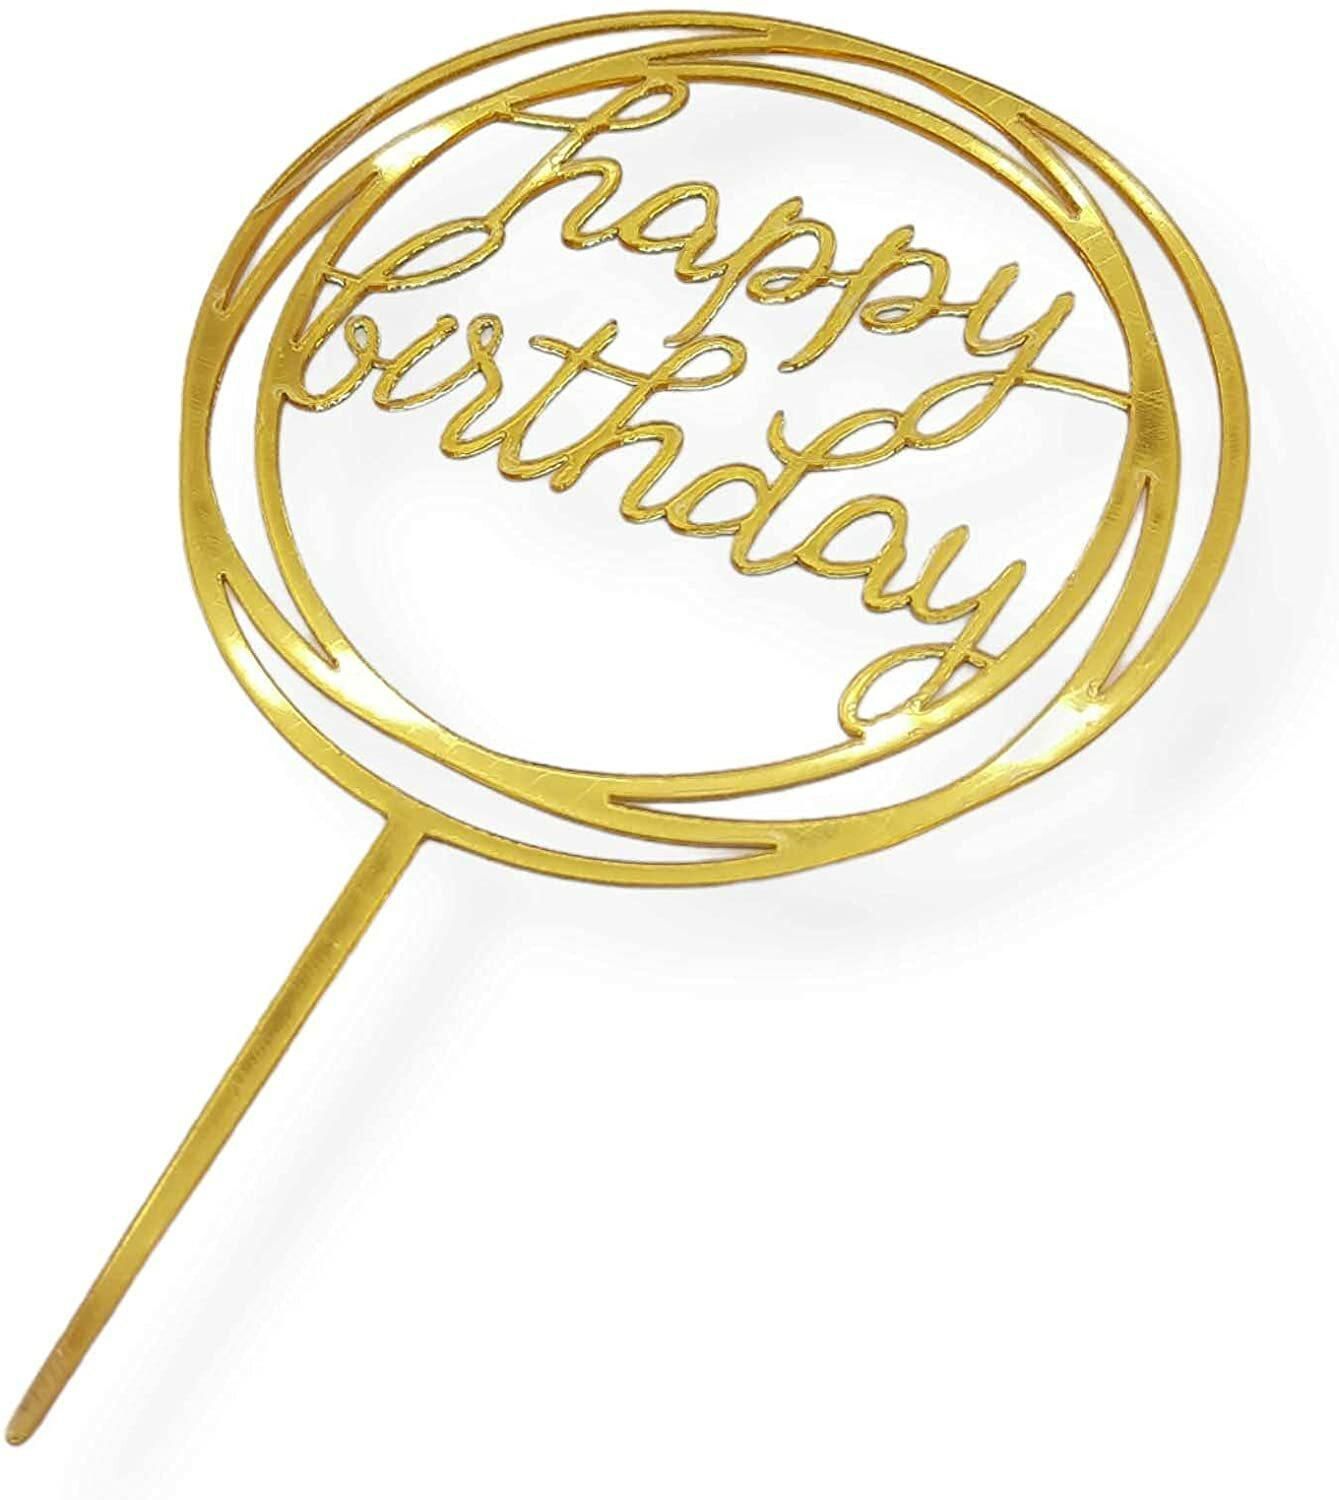 Party Time Round Shape &quot;Happy Birthday&quot; Acrylic Golden Color Happy Birthday Cake Topper for Birthday Decoration/Happy Birthday Cake Decoration Item - Cake Topper